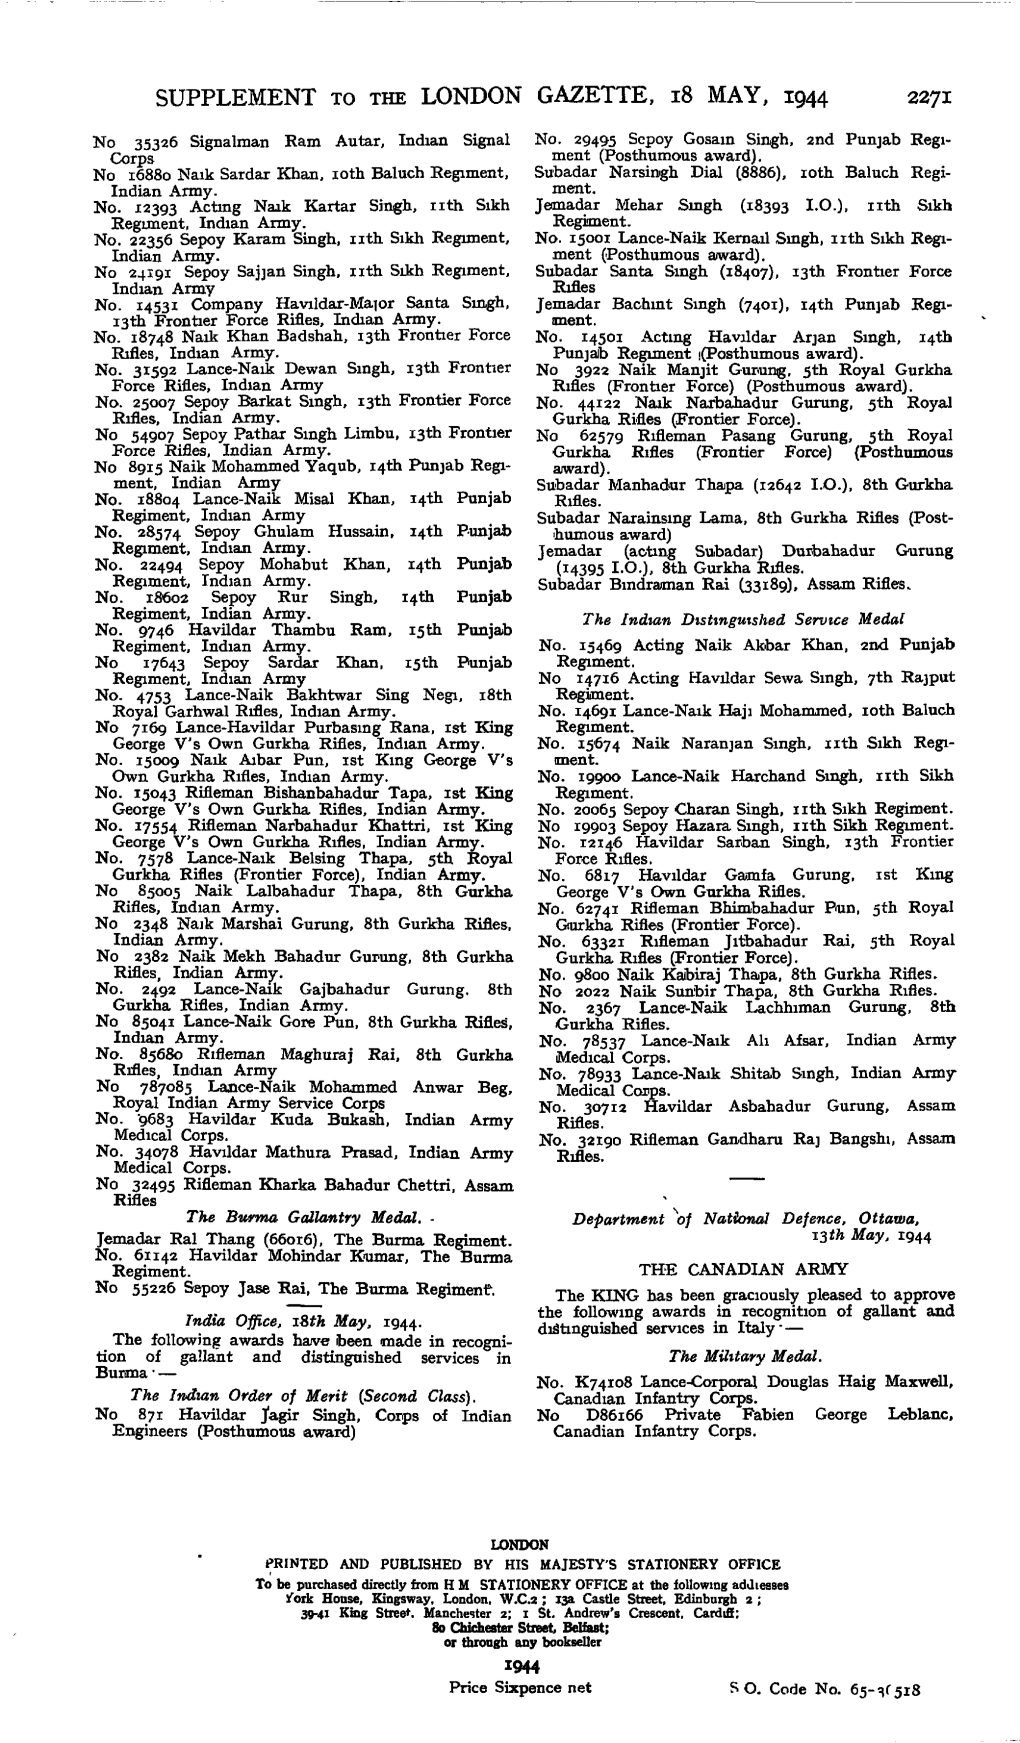 Supplement to the London Gazette, 18 May, 1944 2271